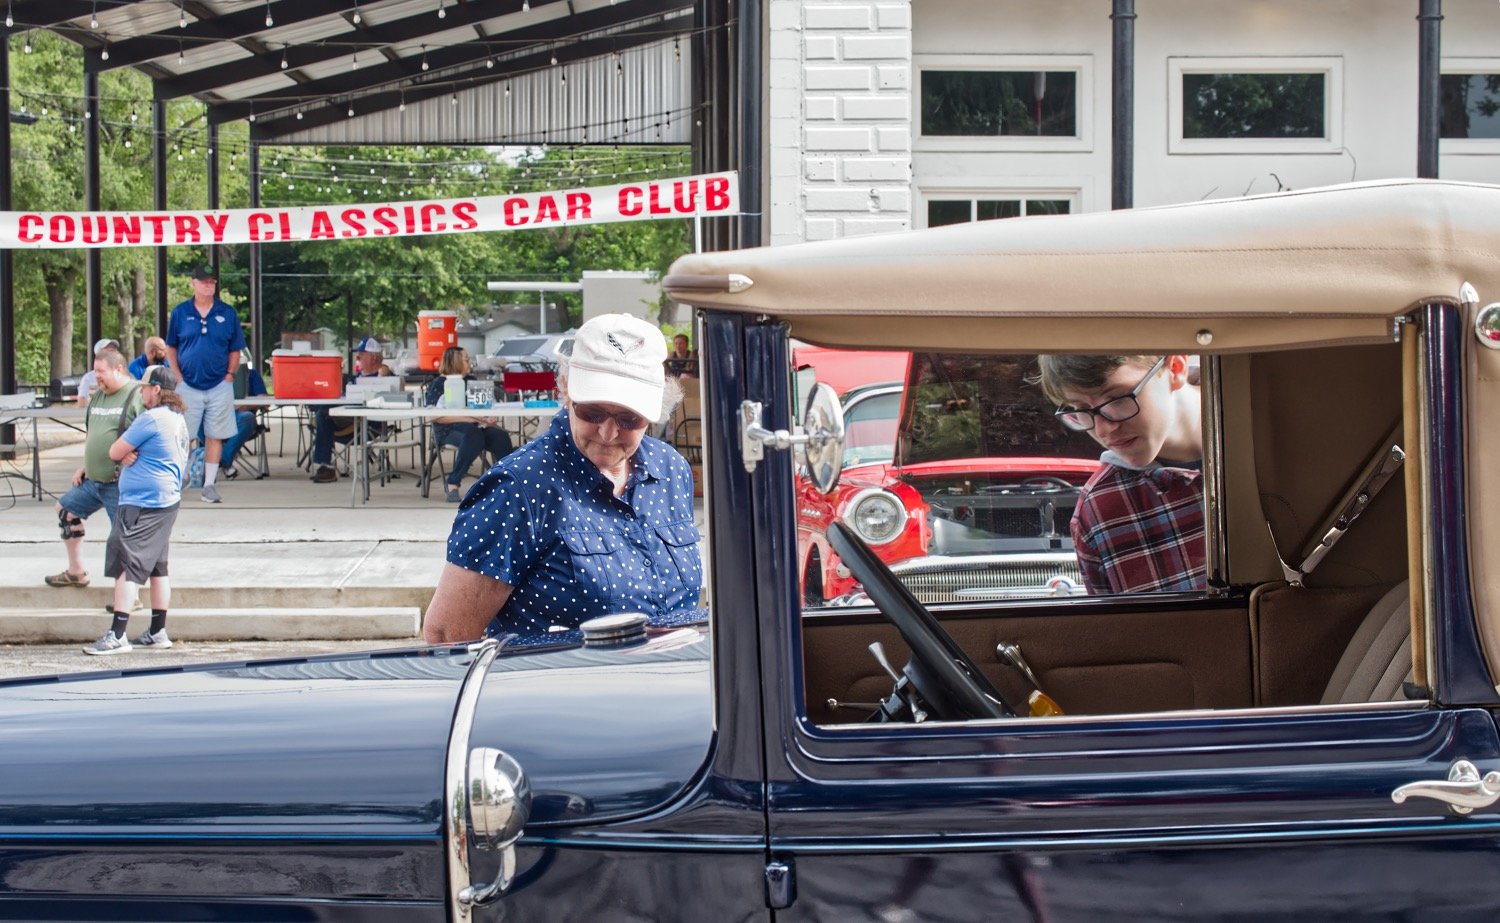 Janet Judkins and Jackson Friddle get a closeup look at an antique Ford Saturday morning at the courthouse square in Quitman. Lake Country Classic Cars put on the show which has been delayed by COVID-19 restrictions since March.